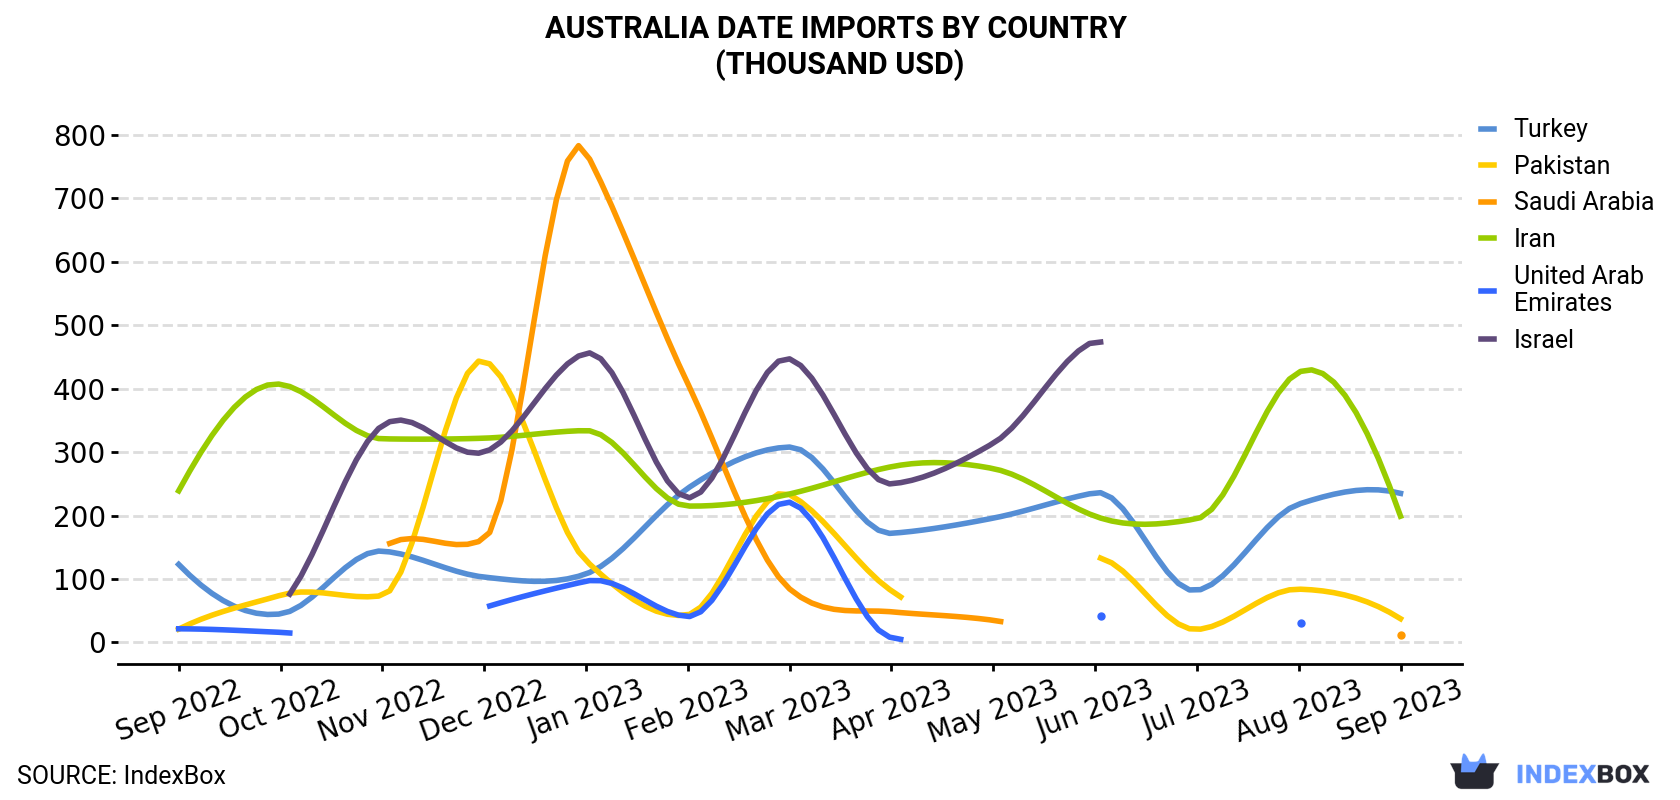 Australia Date Imports By Country (Thousand USD)